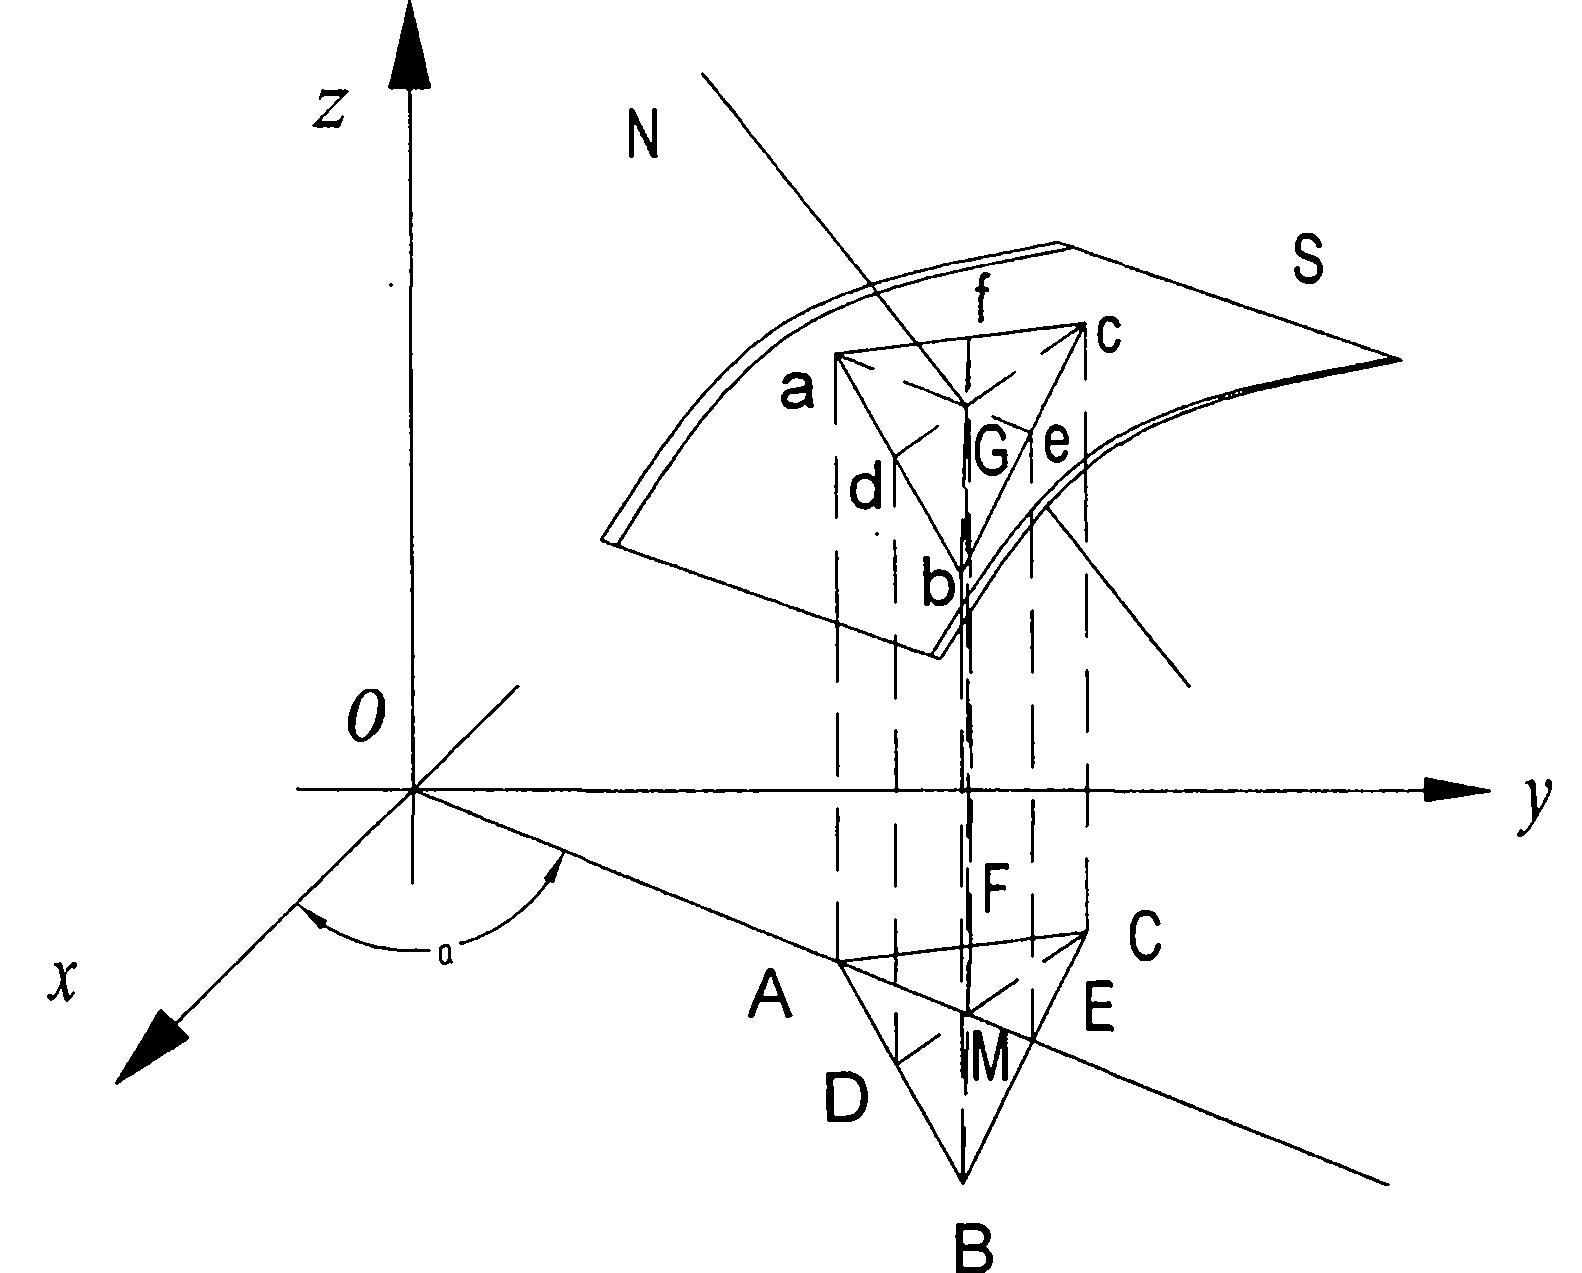 Method for measuring spatial rotating surface by taking coordinate of ball center of steel pin as target point